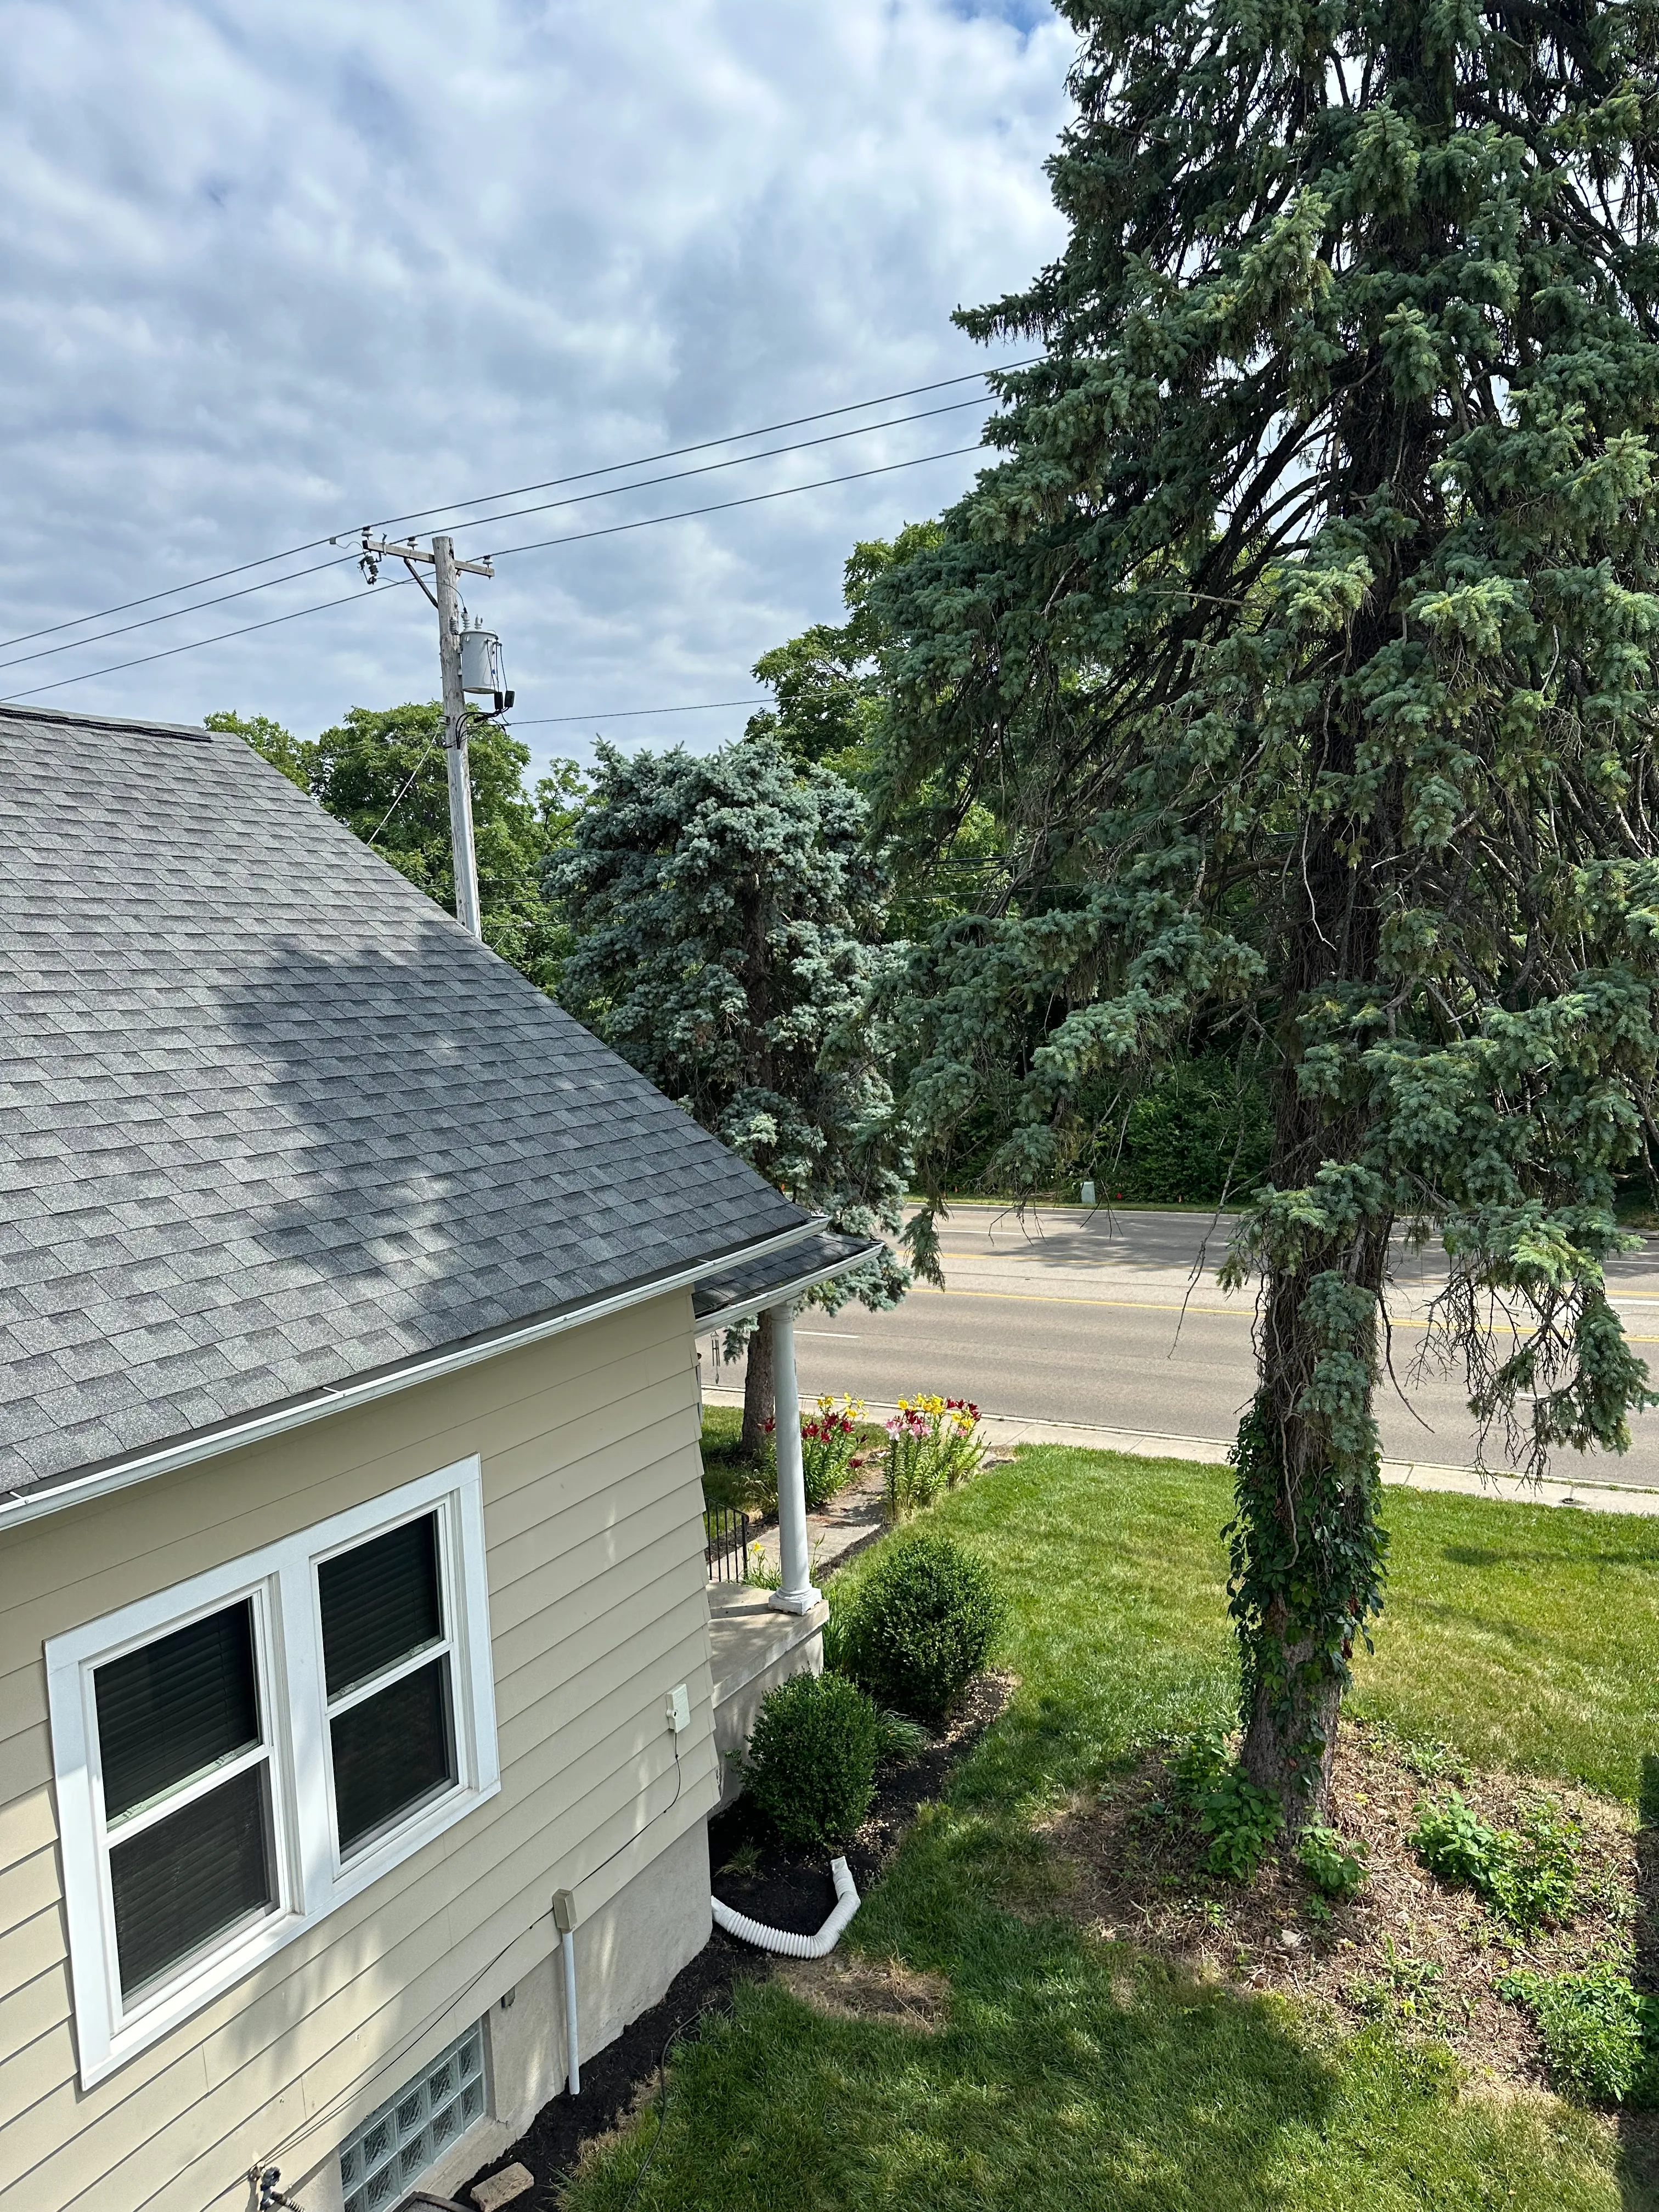 Tree Trimming and Thinning for Pro Tree Trim & Removal, Llc in Dayton, OH